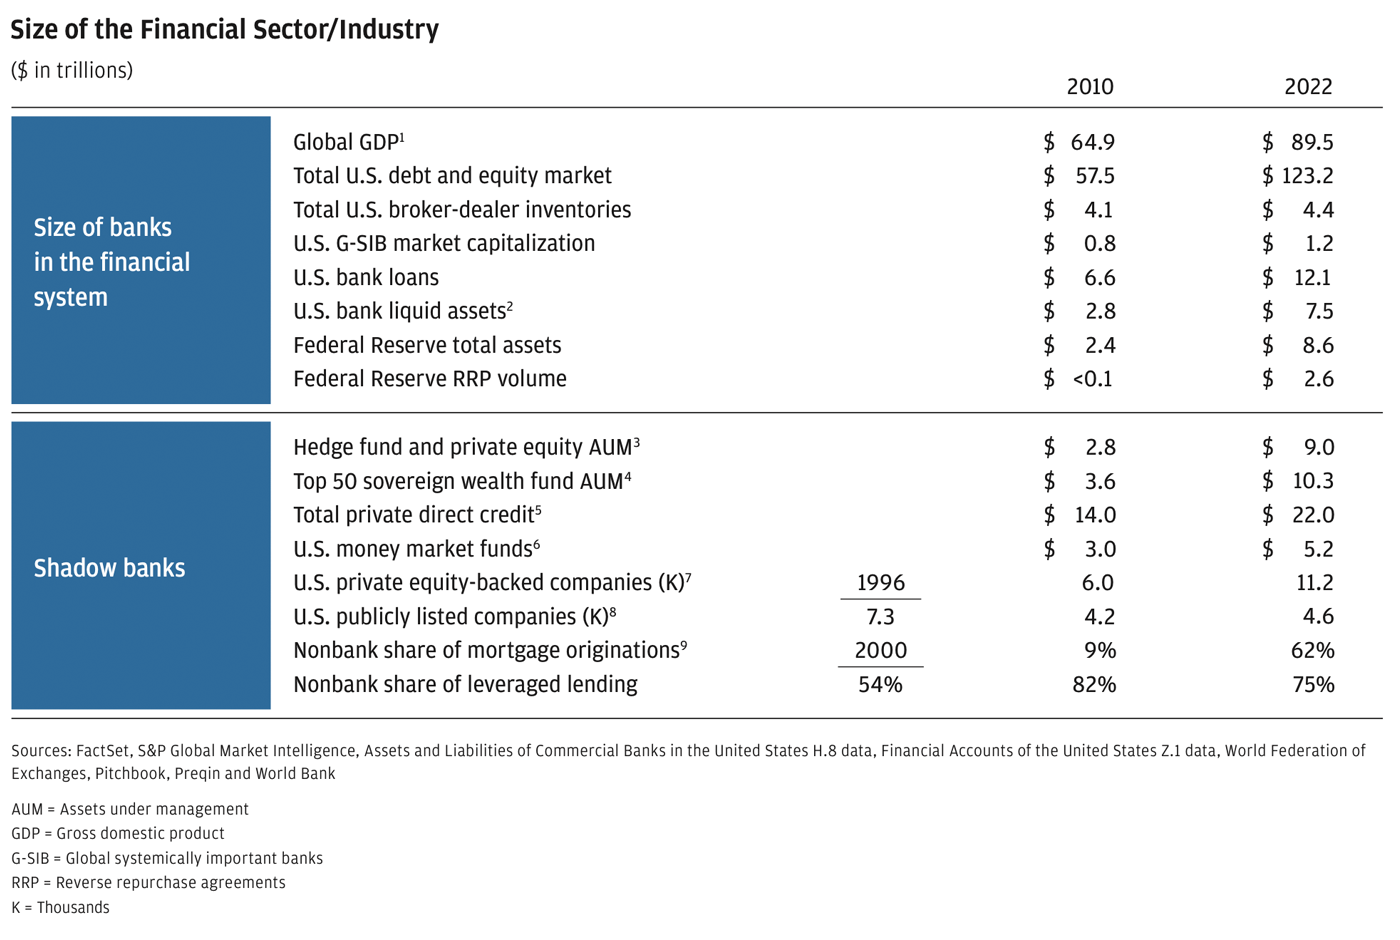 Size of financial sector/industry, Footnote 1 2010 is sourced from WorldBank.org annual GDP publication. 2022 is calculated using JPM Research forecasts. Figures are represented in 2015 prices, Footnote 2 Consists of cash assets and Treasury and agency securities, Footnote 3 2022 figure is annualized based on available data through 1Q, Footnote 4 Top 50 fund AUM data per Sovereign Wealth Fund Institute, where unavailable 2021 disclosure was used in place of 2022, Footnote 5 Loans held by nonbank entities per the FRB Z.1 Financial Accounts of the United States, Footnote 6 U.S. money market fund investment holdings of securities issued by entities worldwide, Footnote 7 Methodology updated in 2022, 2010 has been restated, Footnote 8 NYSE + NASDAQ; excludes investment funds, exchange-traded funds' unit trusts and companies whose business goal is to hold shares of other listed companies; a company with several classes of shares is only counted once, Footnote 9 Inside Mortgage Finance and JPMorgan Chase internal data; consists of Top 50 Originators.